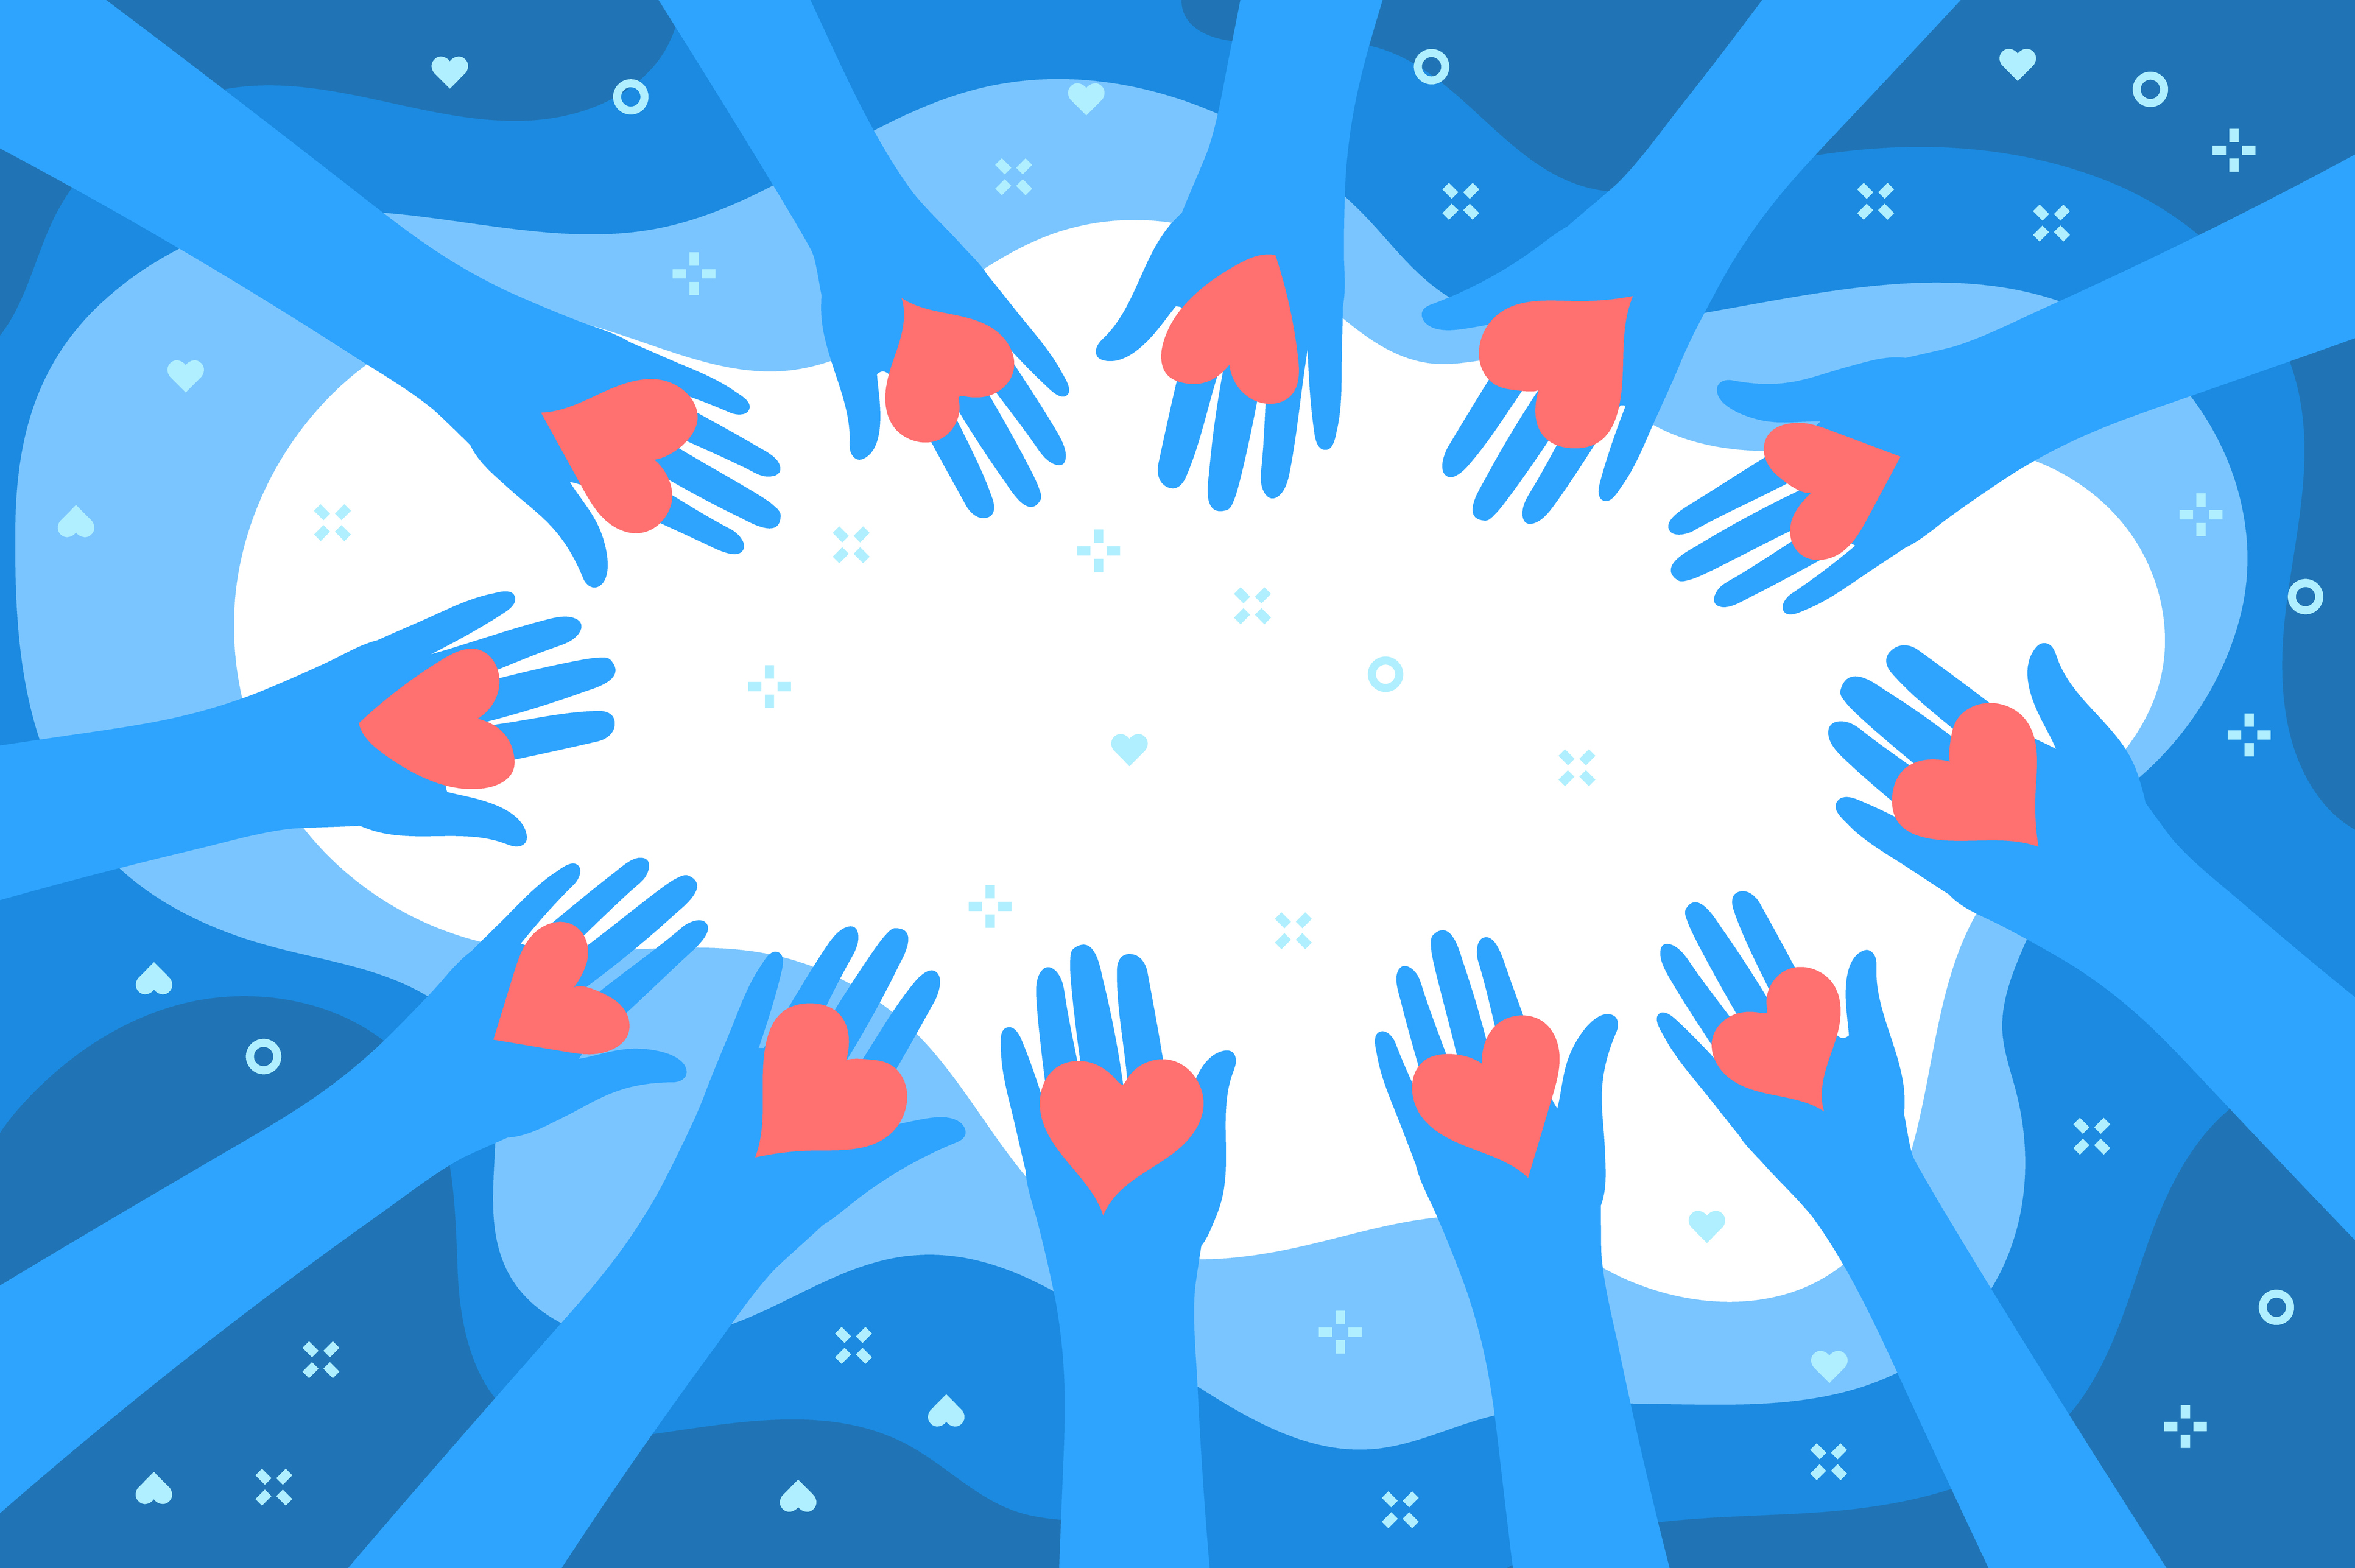 nonprofits, you need a social media presence: here's why